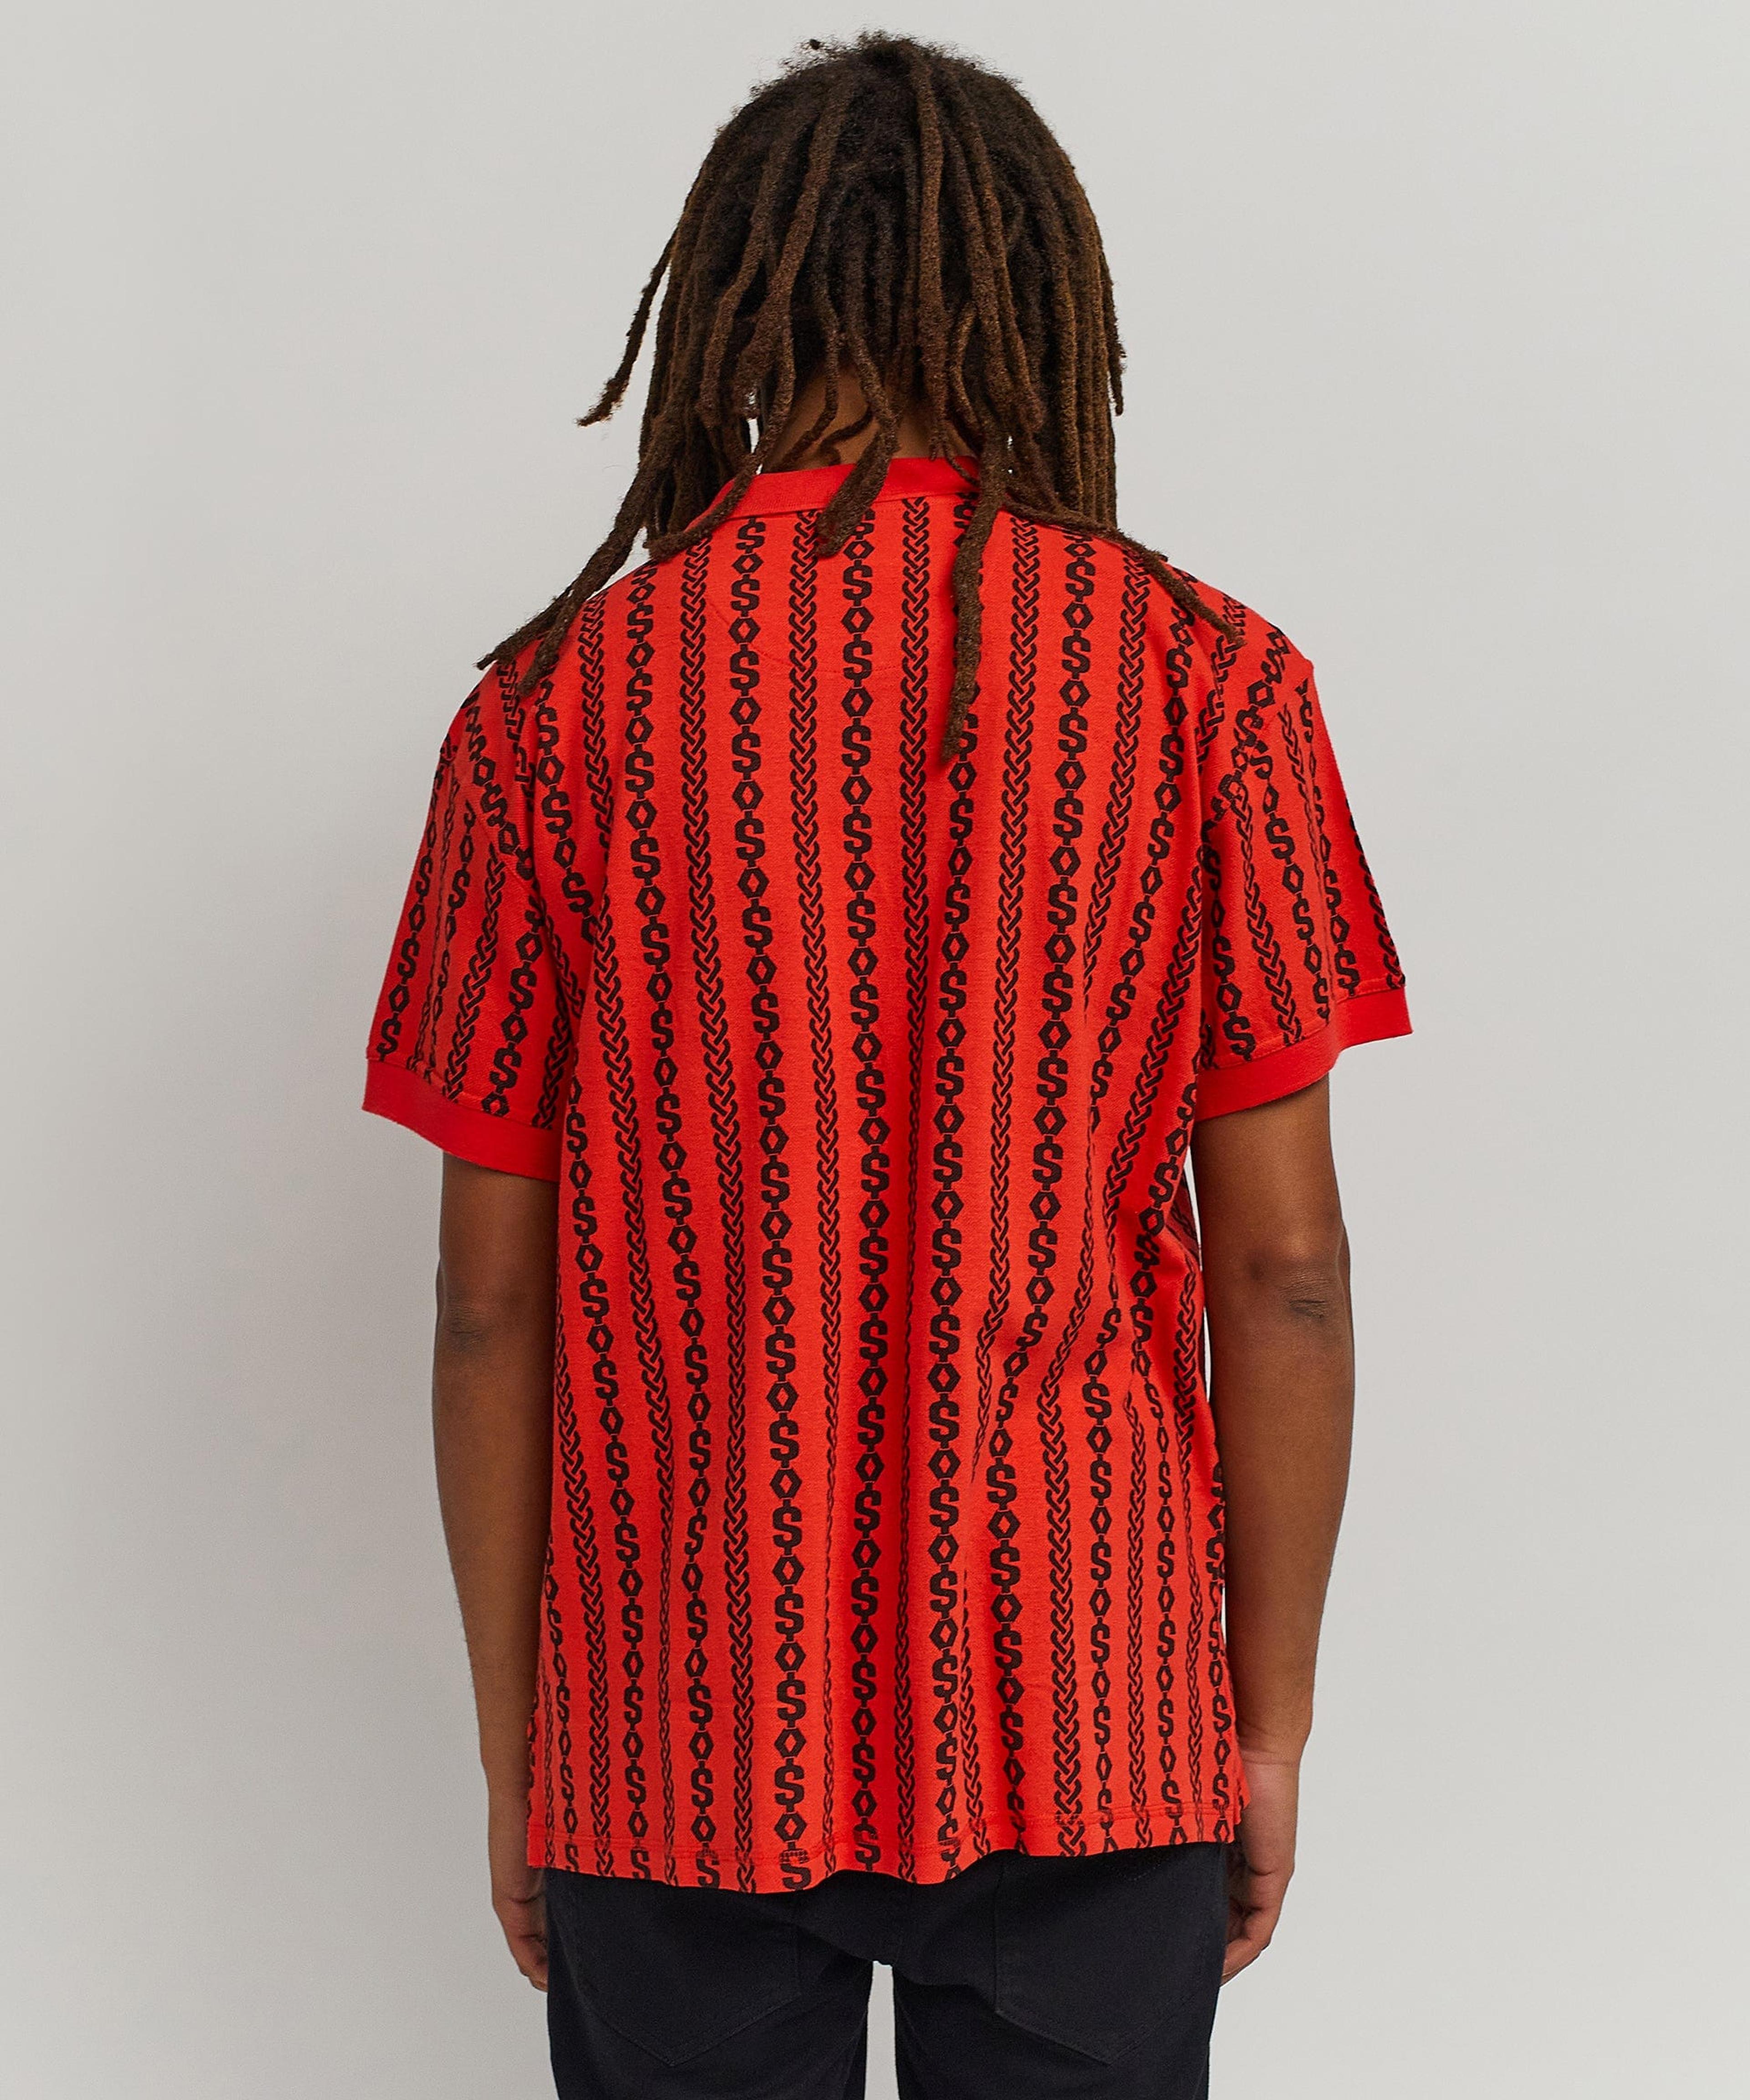 Alternate View 1 of Knit Stripe Allover Print Polo - Red